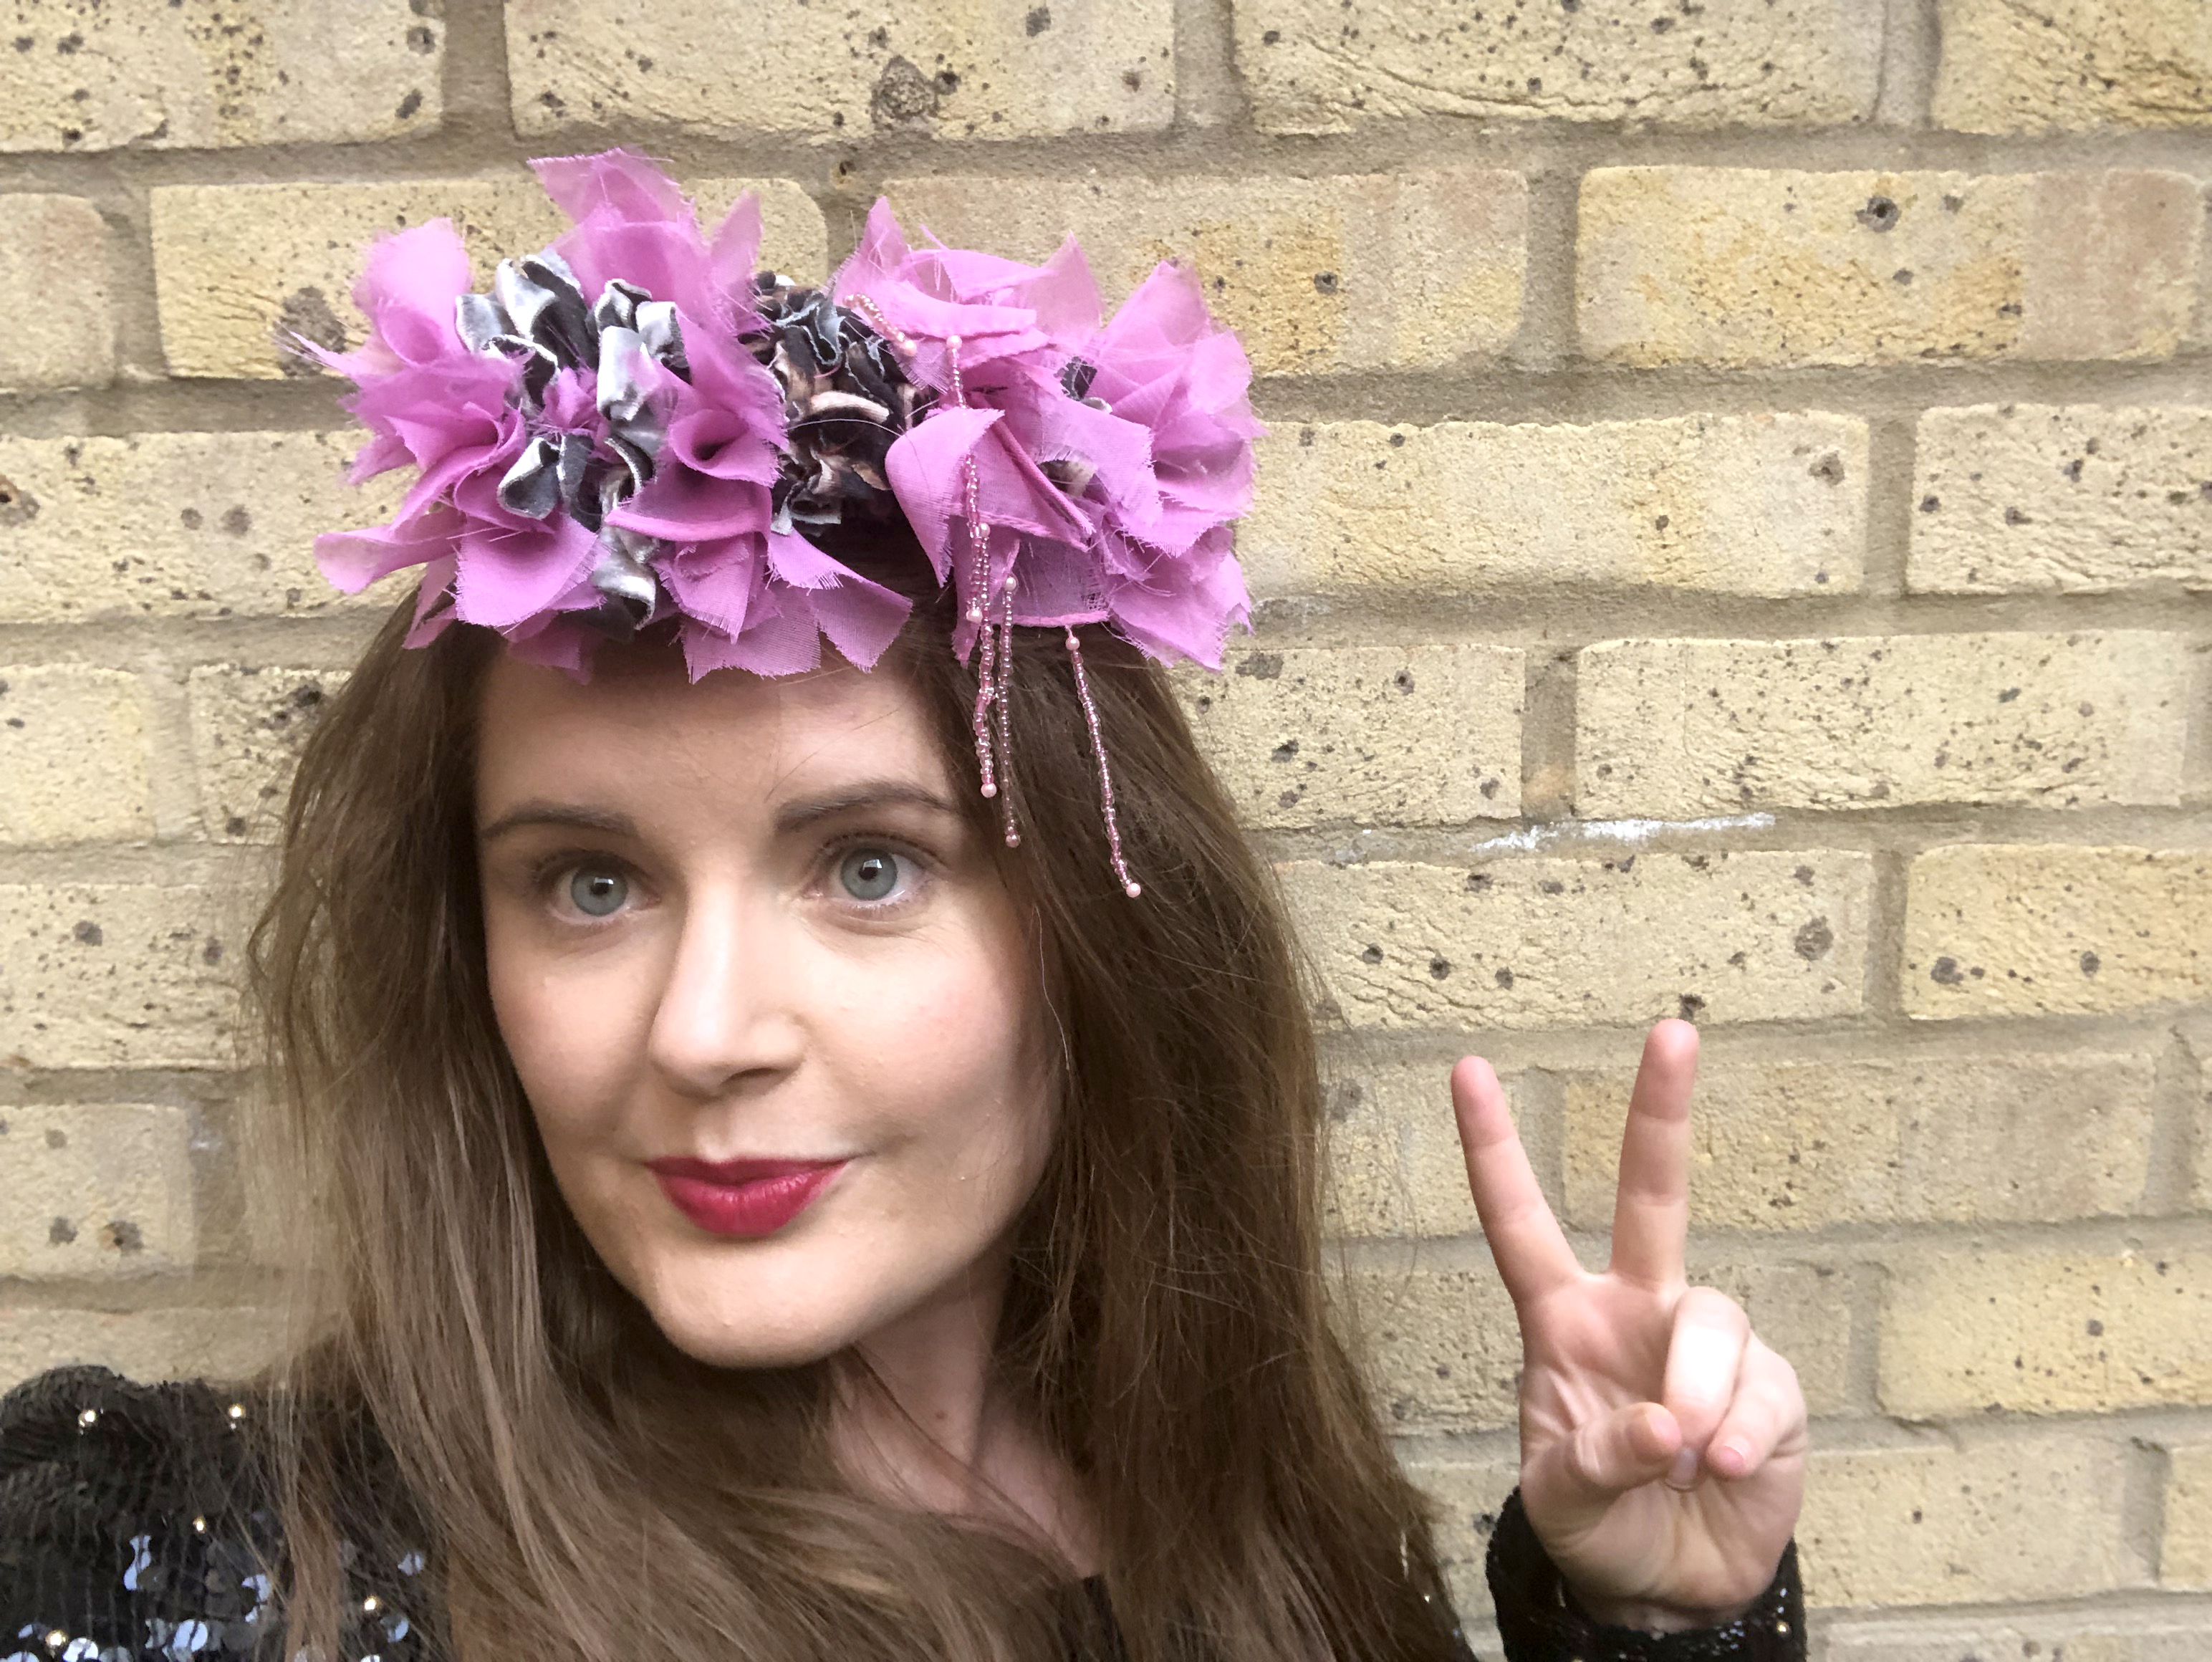 Elspeth Jackson from Ragged Life modelling a pink punk rag rug headband made using recycled materials